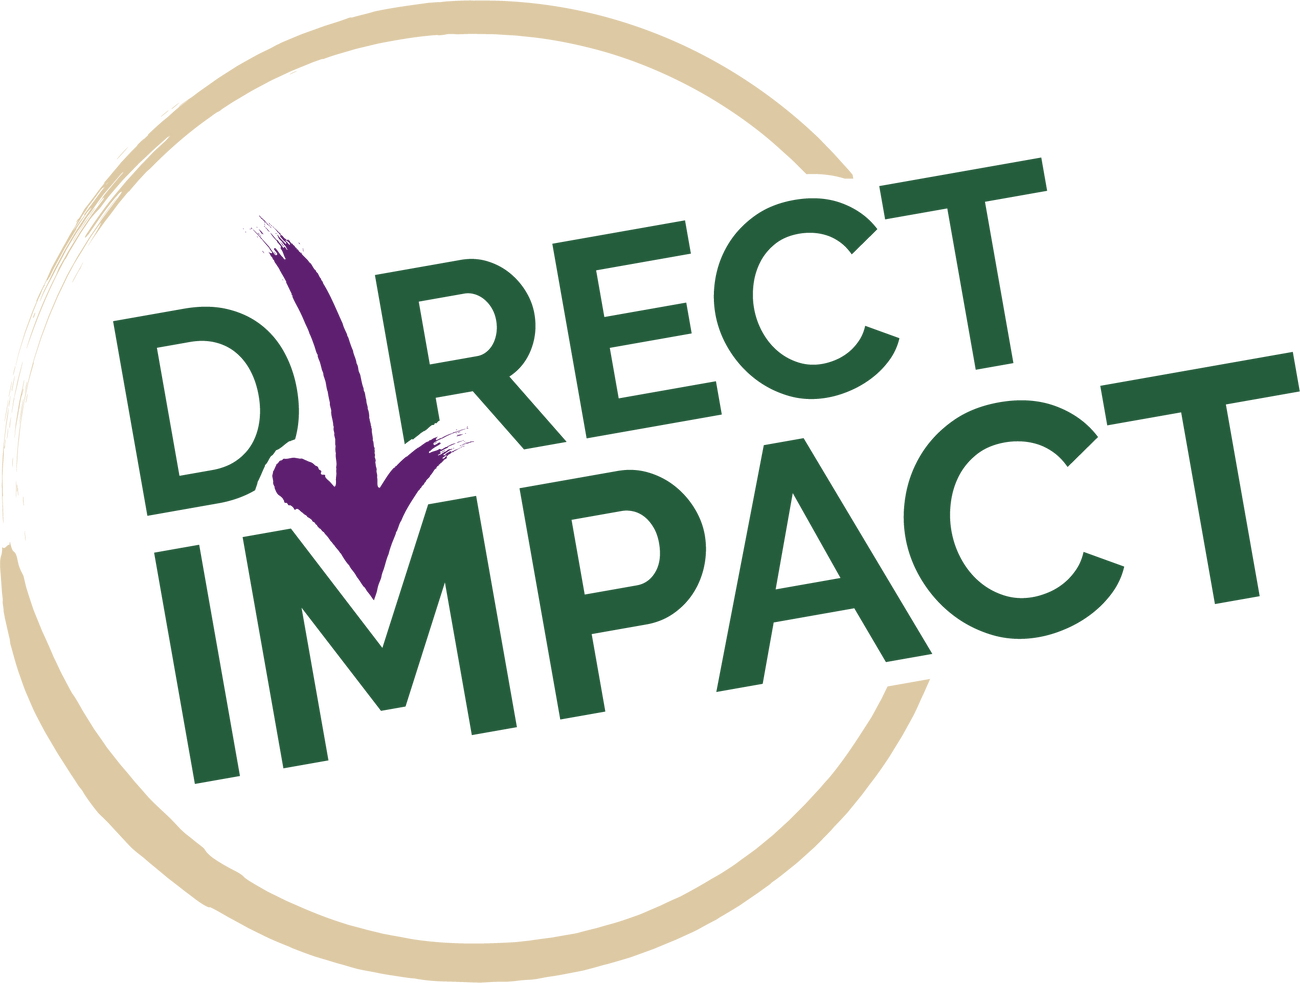 PURPOSE™ TEA LAUNCHES DIRECT IMPACT™ PROGRAM TO HELP LIFT FEMALE TEA WORKERS OUT OF POVERTY